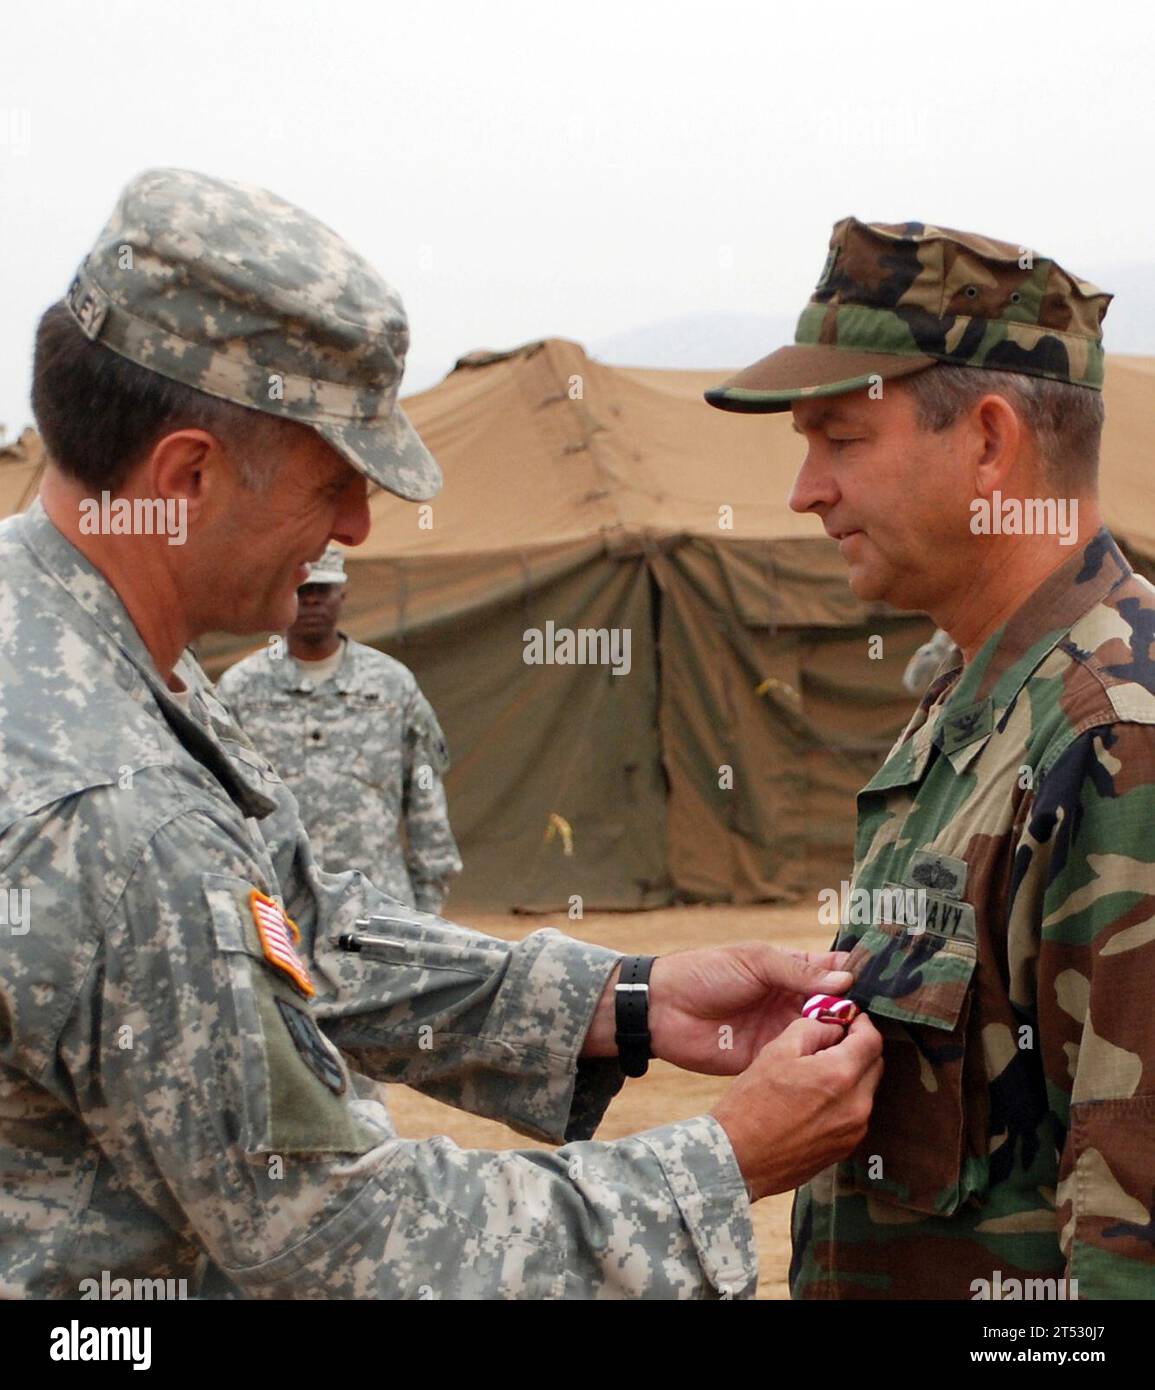 0808014973M-052 CAMP PENDLETON, Calif. (August 1, 2008) Brig. Gen. Mark MacCorley, deputy commander of Joint Task Force (JTF) 8, awards the Meritorious Service Medal to Capt. Thomas Weatherald, commander of Joint Logistics Over-The-Shore (JLOTS) 2008. JLOTS 2008 is an engineering, logistical training exercise between Army and Navy units under a joint force commander as a means to load and unload ships without the benefit of deep draft-capable, fixed port facilities. Stock Photo